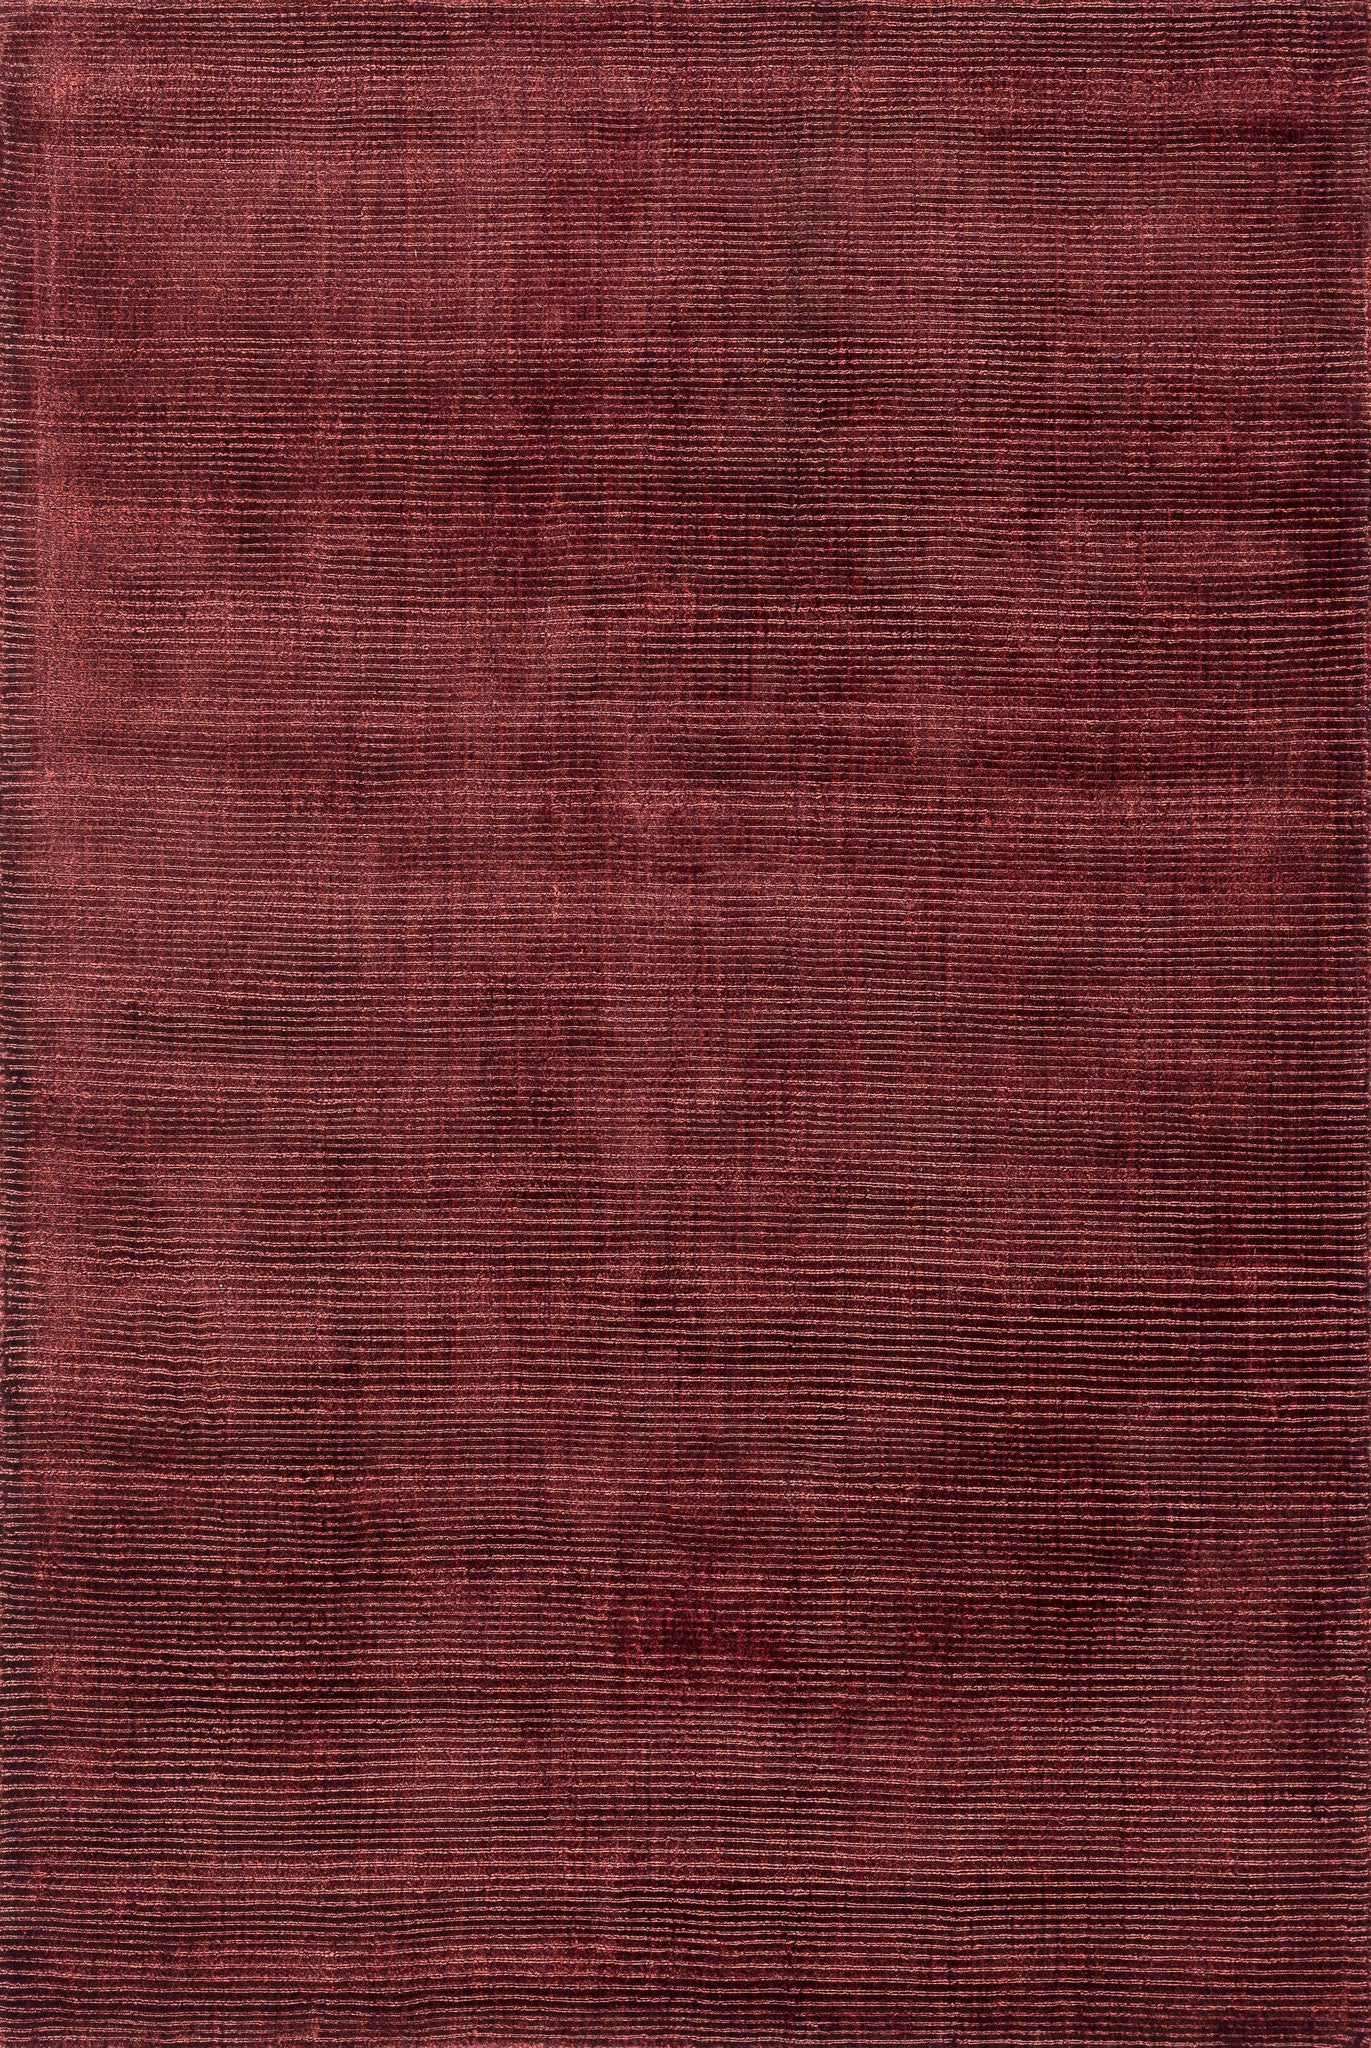 Loloi Luxe LX-01 Ruby Area Rug main image